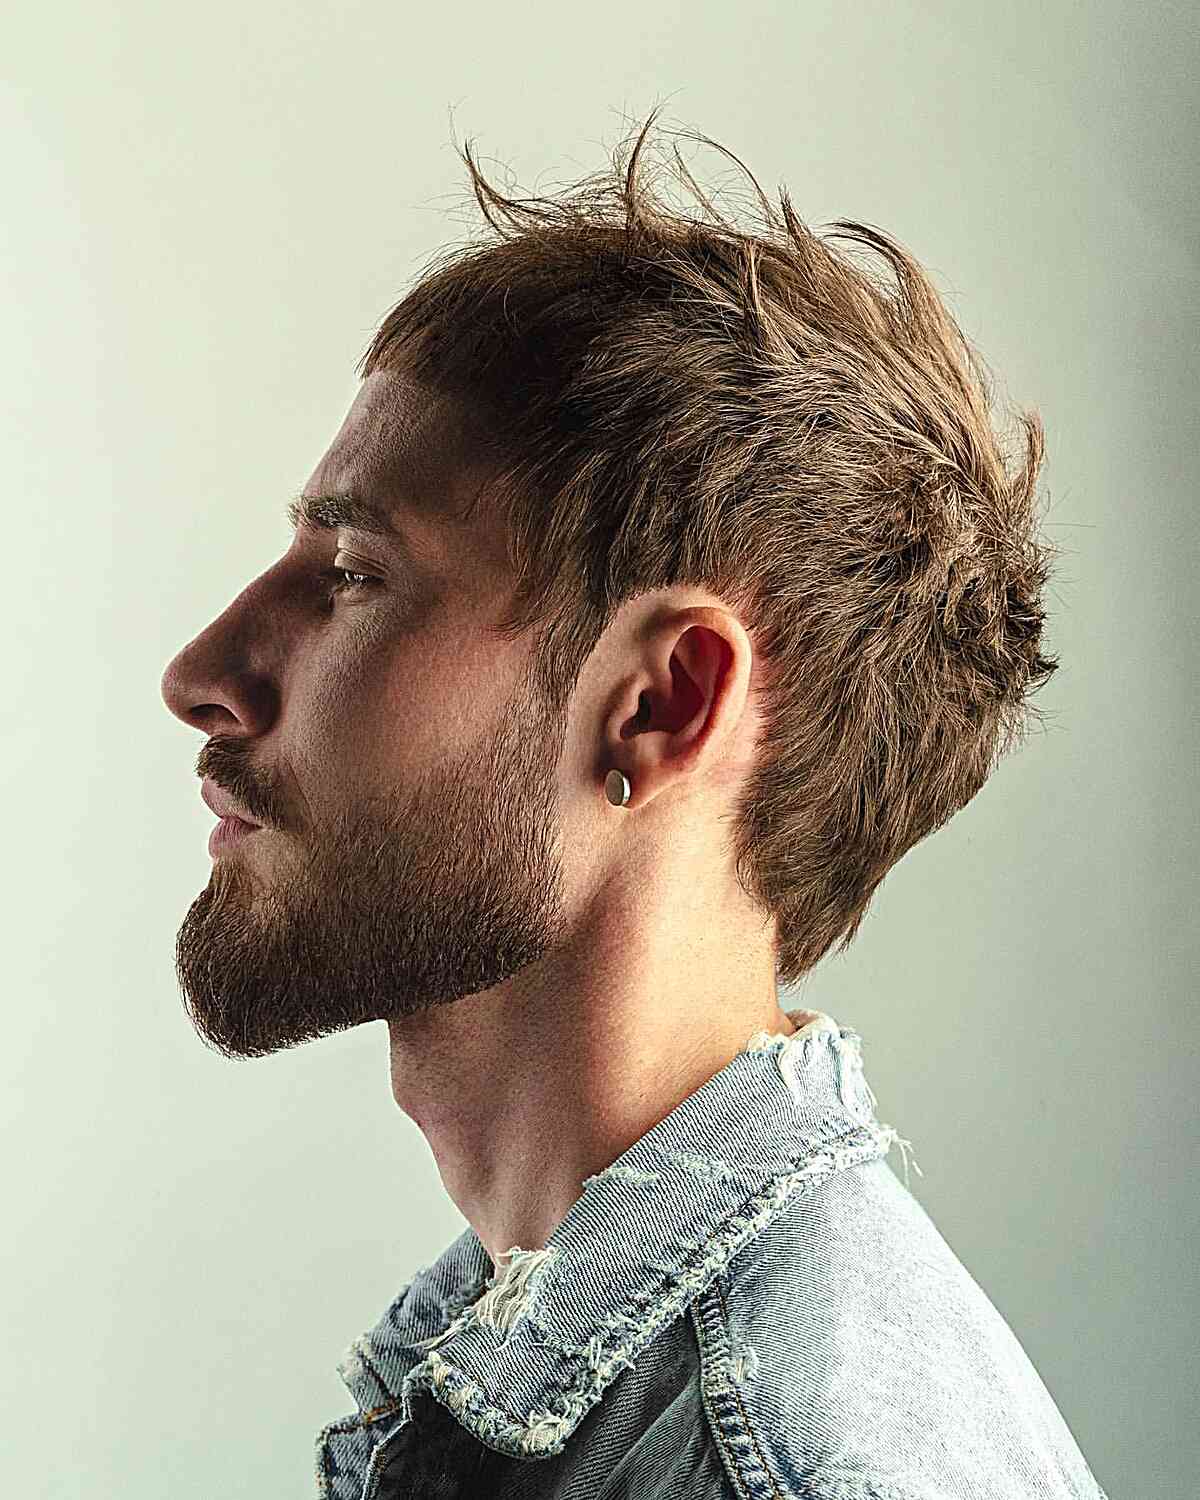 A Look at 12 Best Beard Styles for Men in 2023